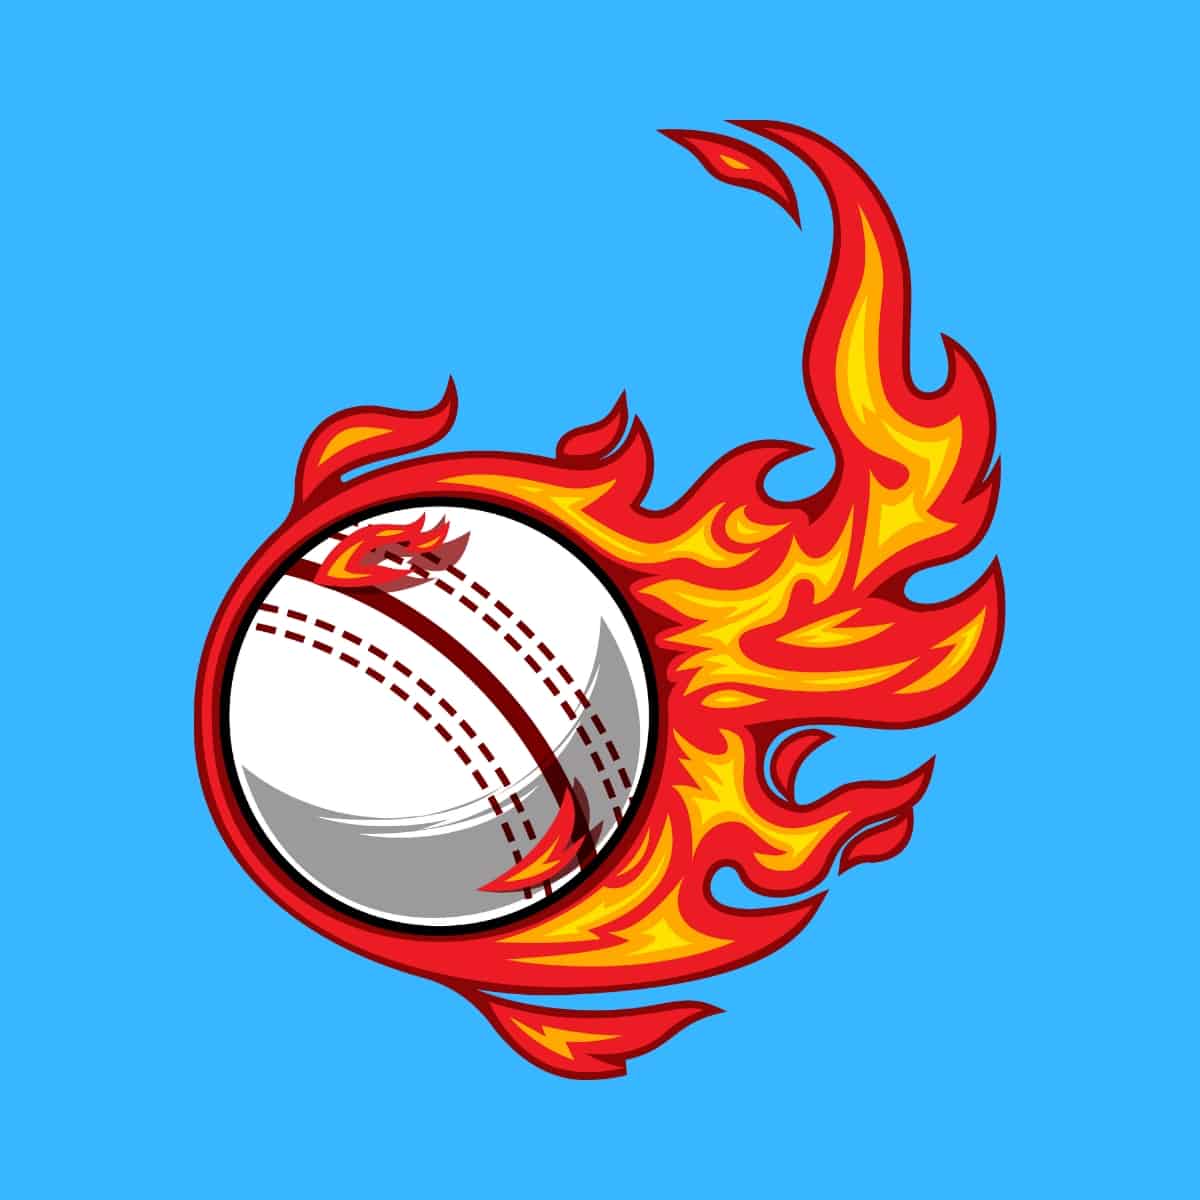 Cartoon graphic of a cricket ball on fire on blue background.